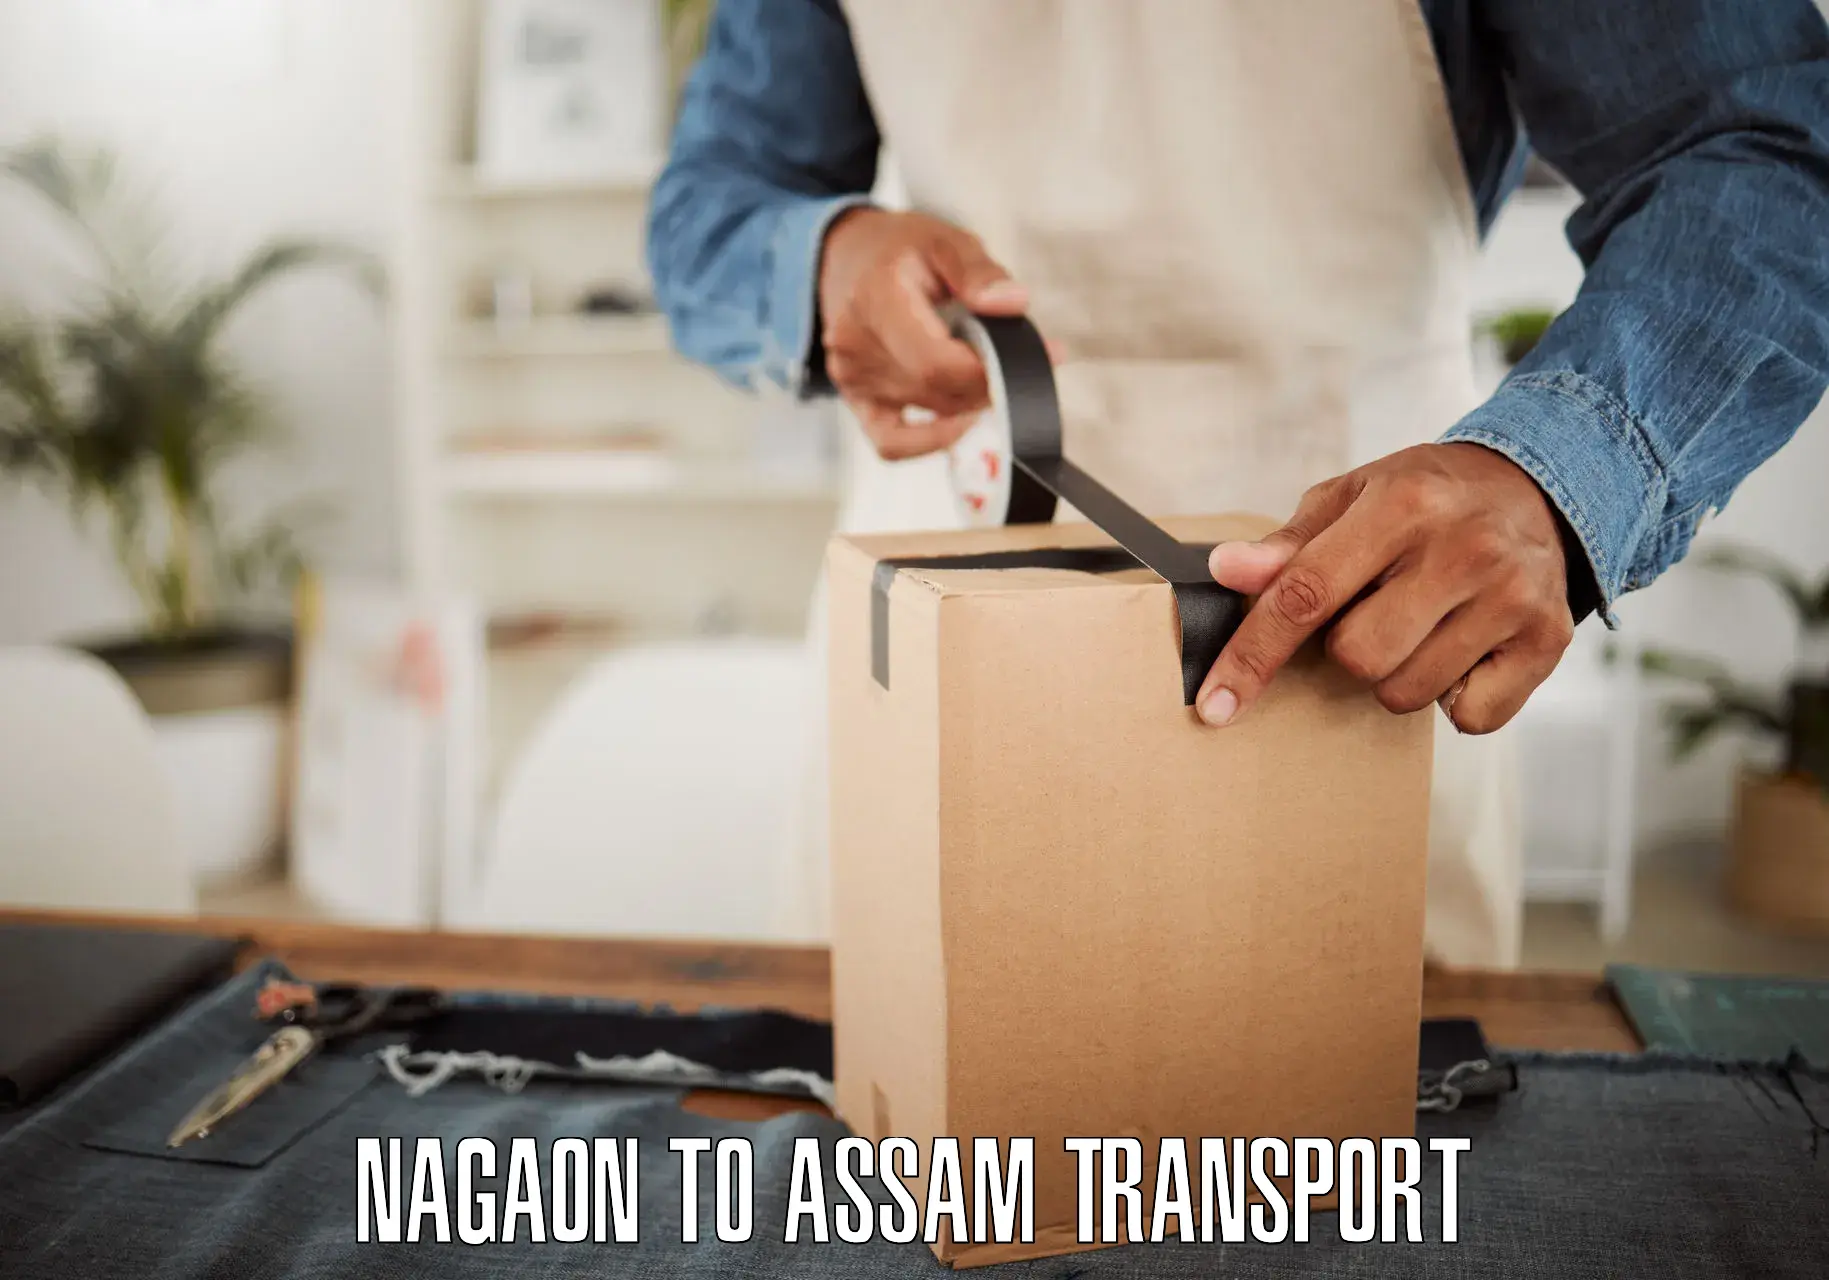 Air cargo transport services Nagaon to Dhubri